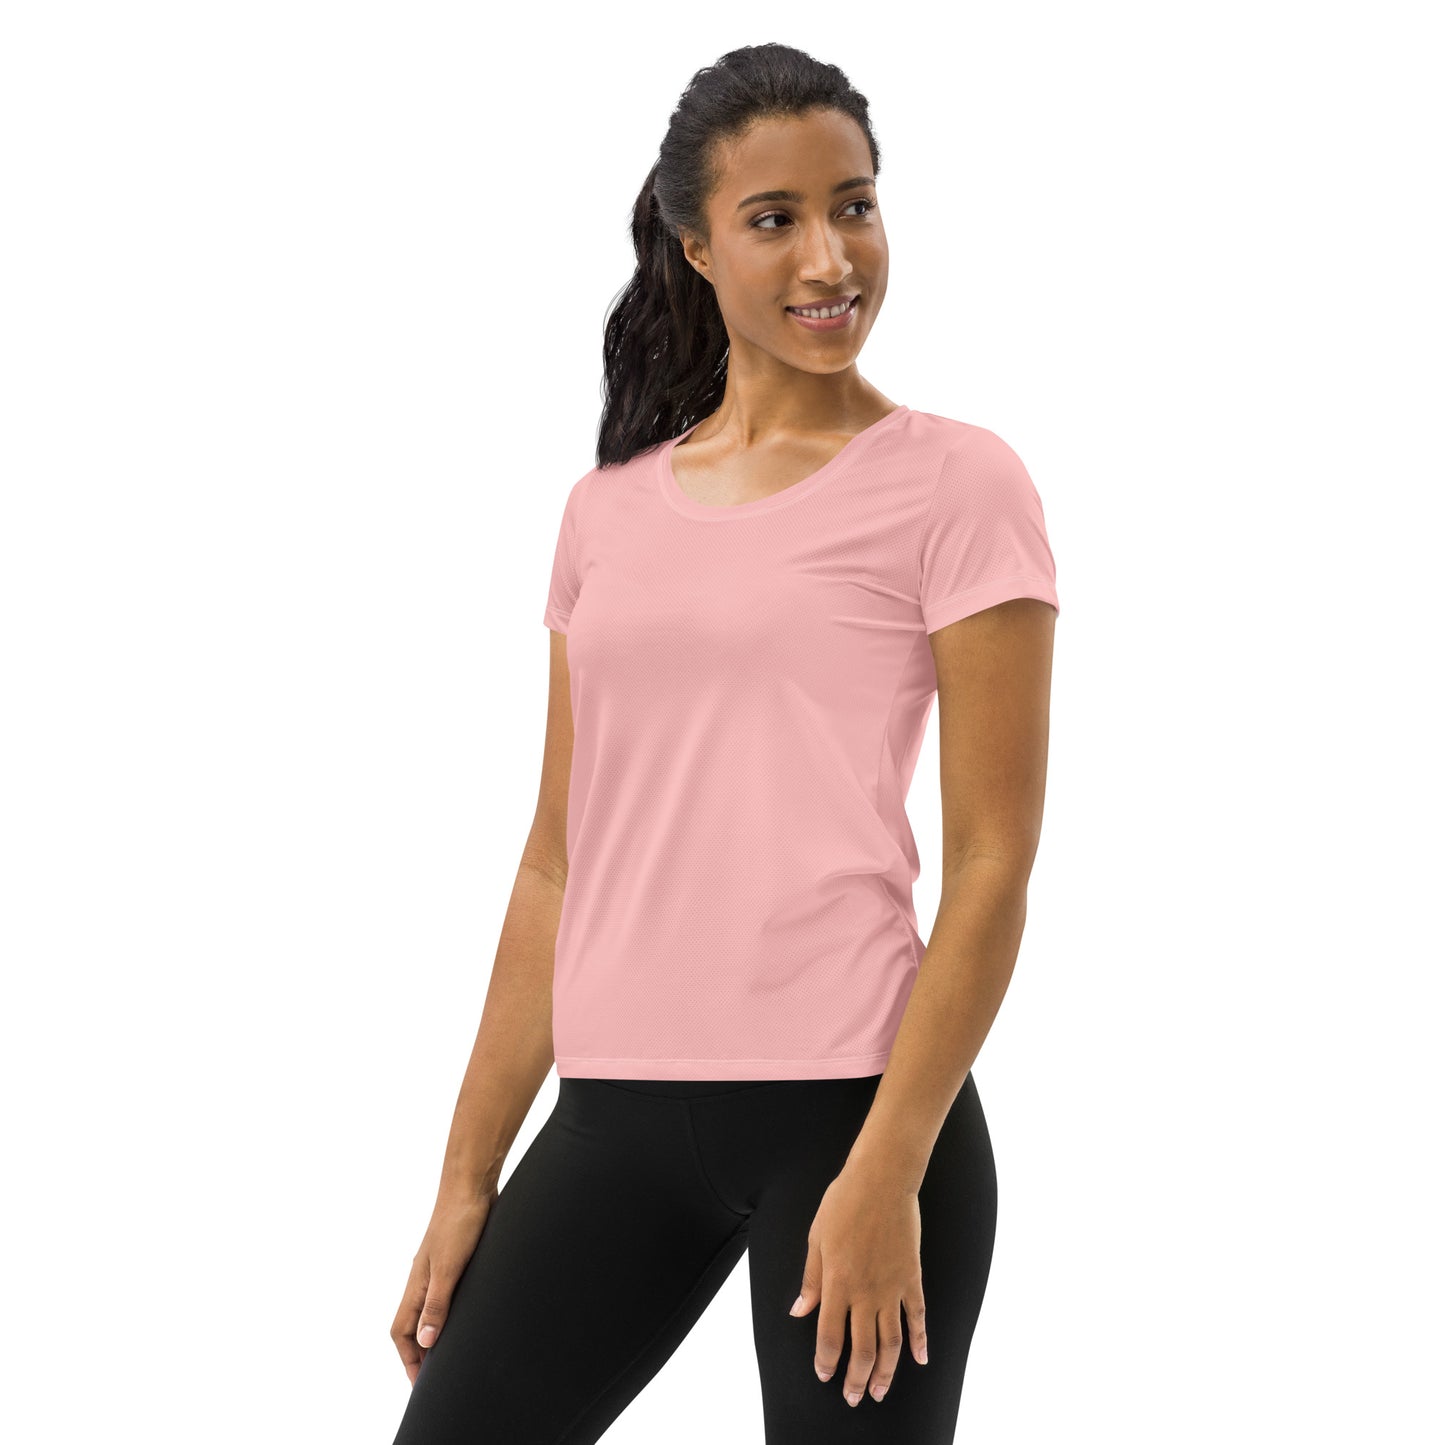 Women's Athletic T-shirt - Pink